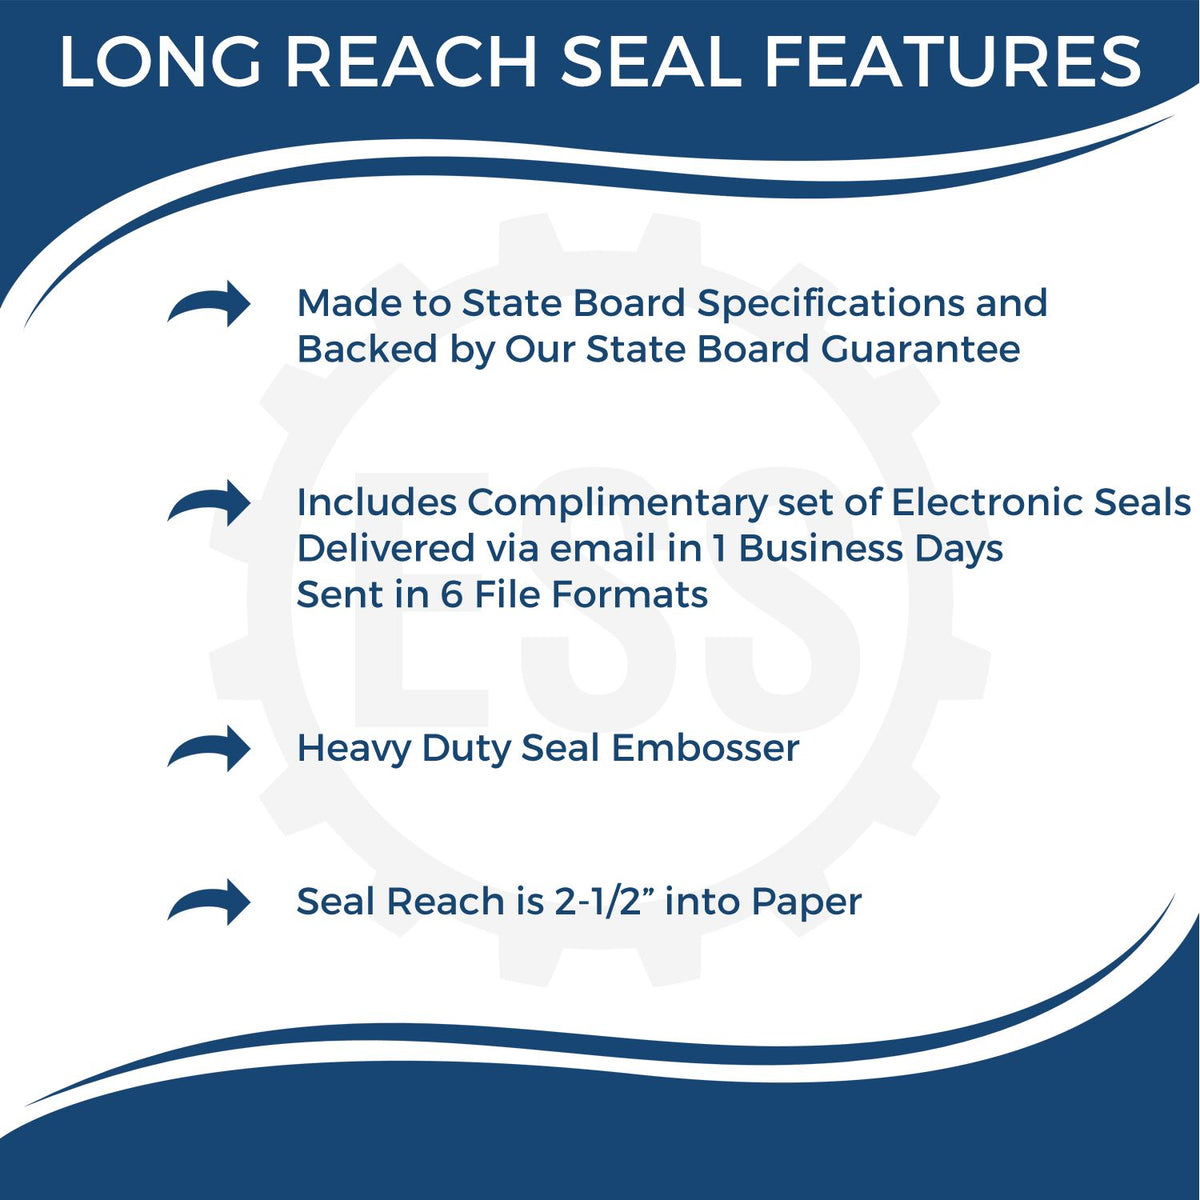 A picture of an infographic highlighting the selling points for the Long Reach Hawaii Land Surveyor Seal